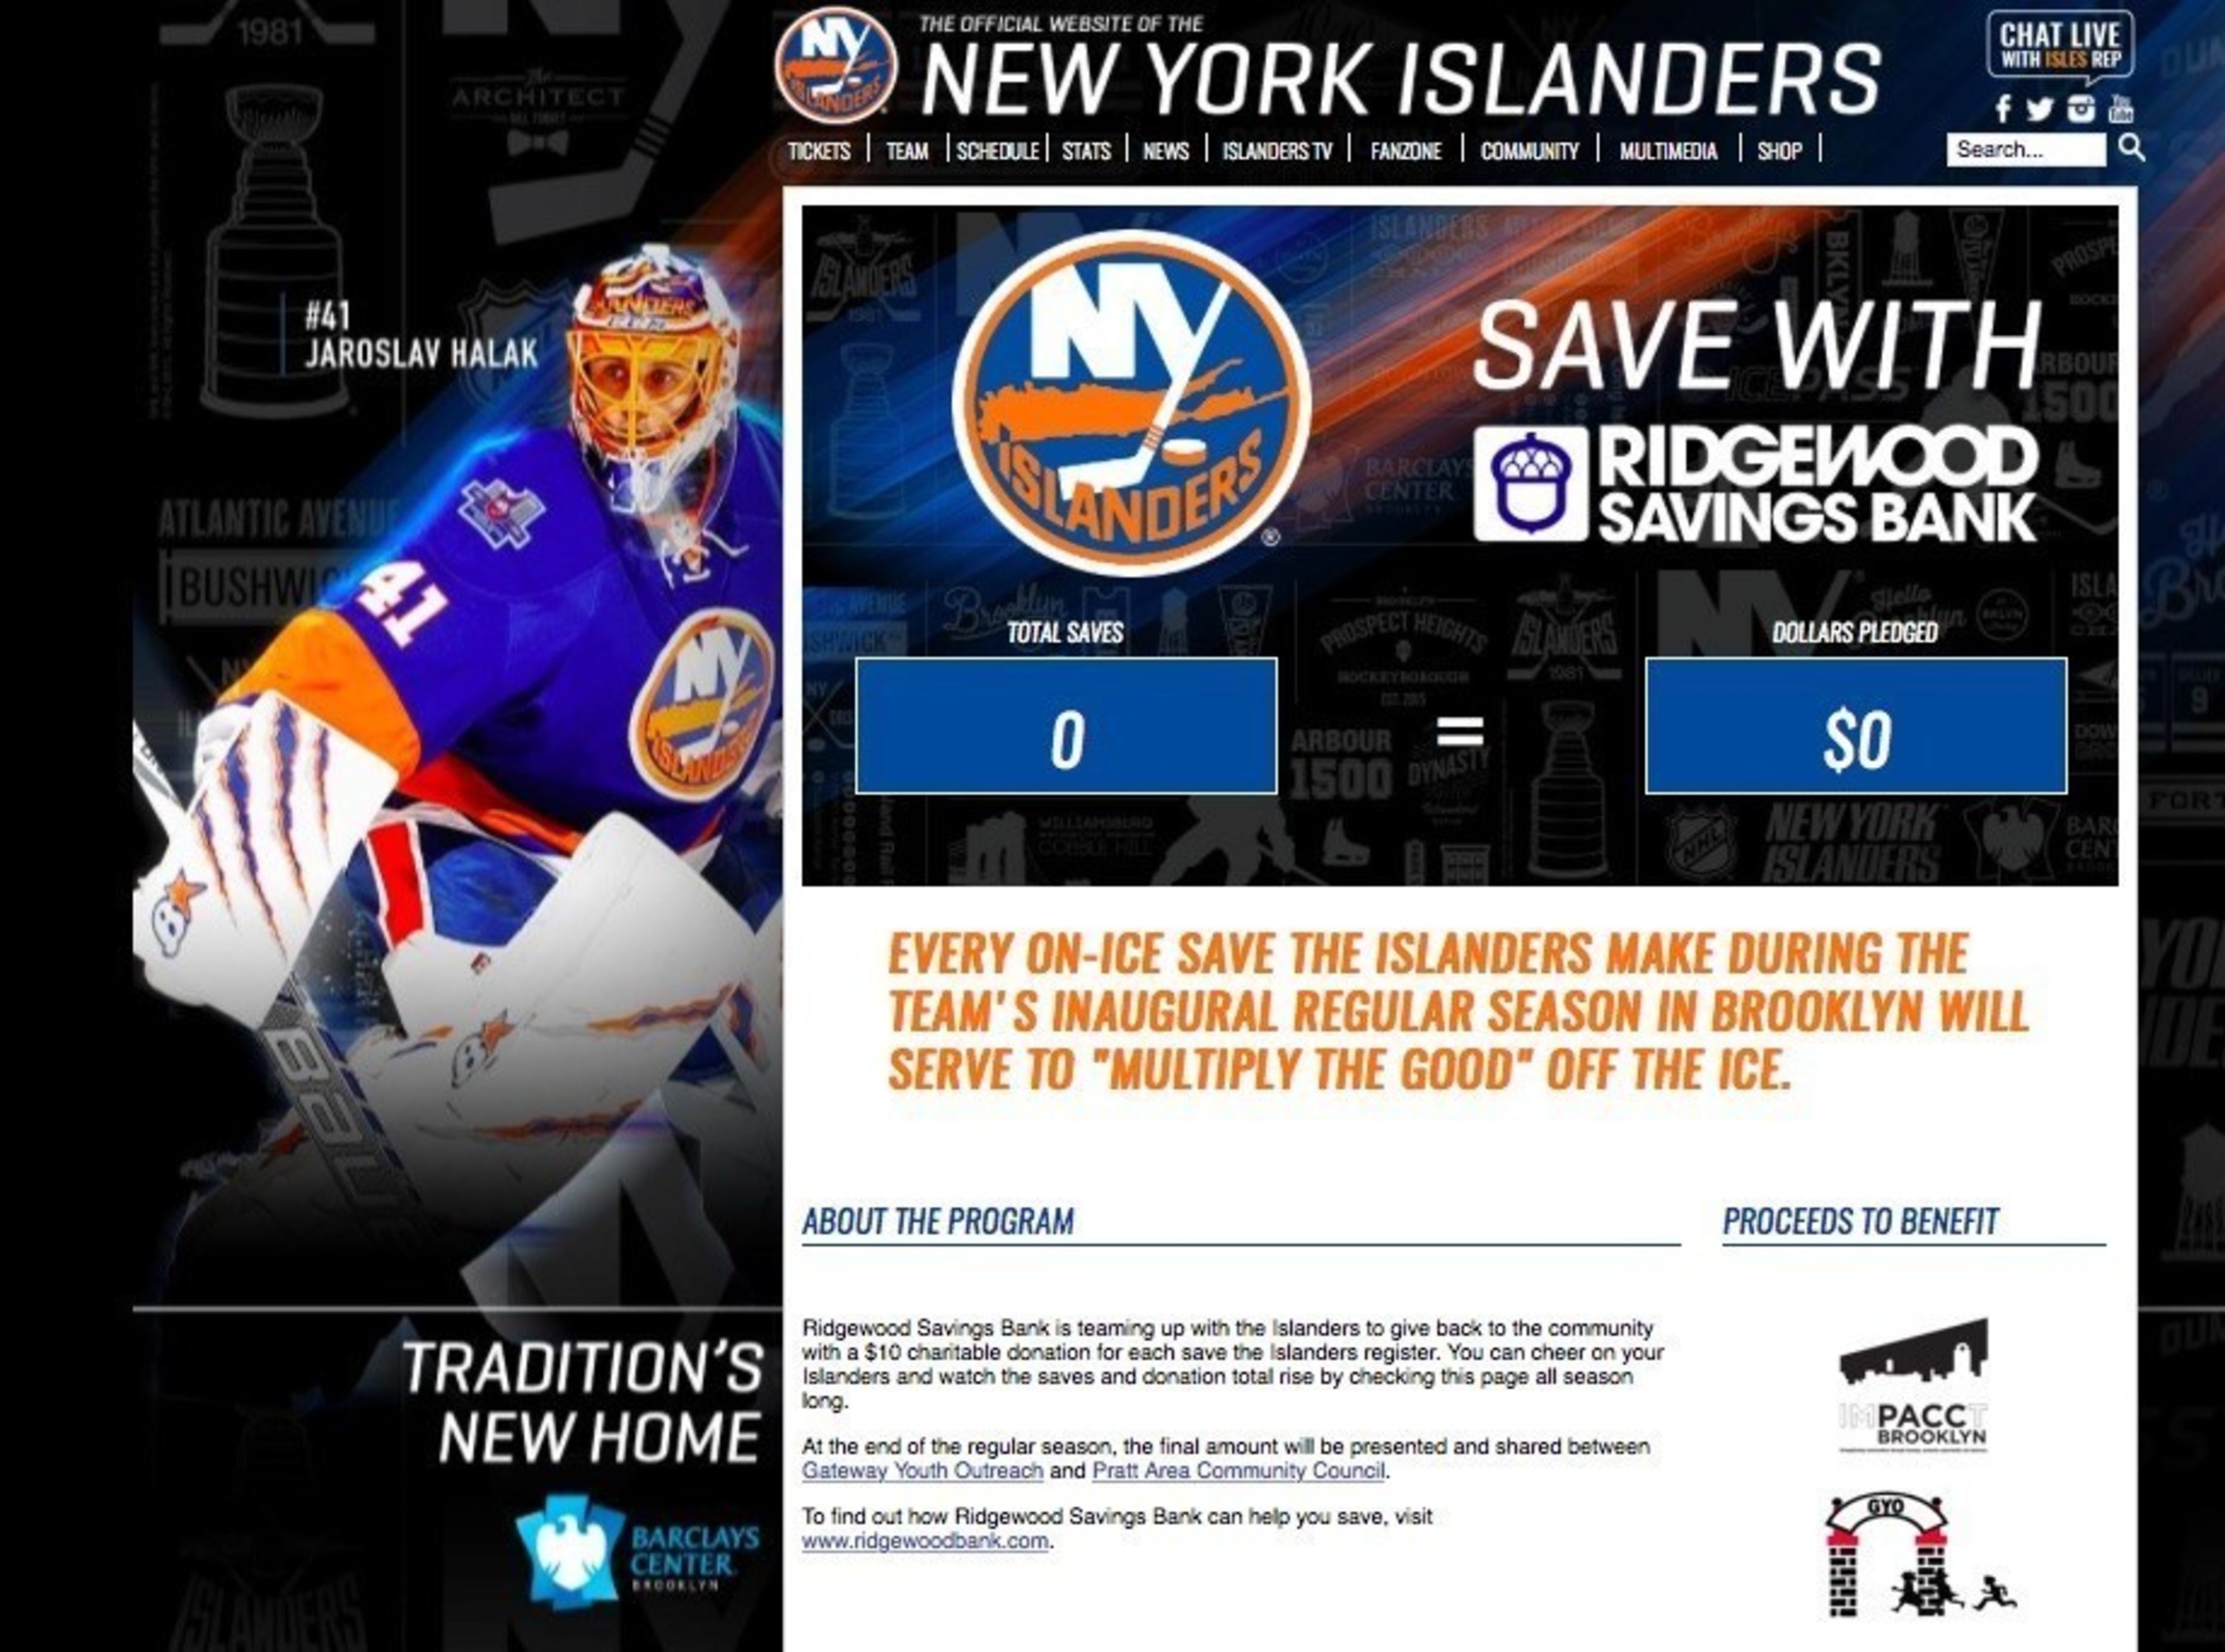 The Islanders website (www.newyorkislanders.com/RSBsave) will track the number of saves throughout the season and will display related content as well.